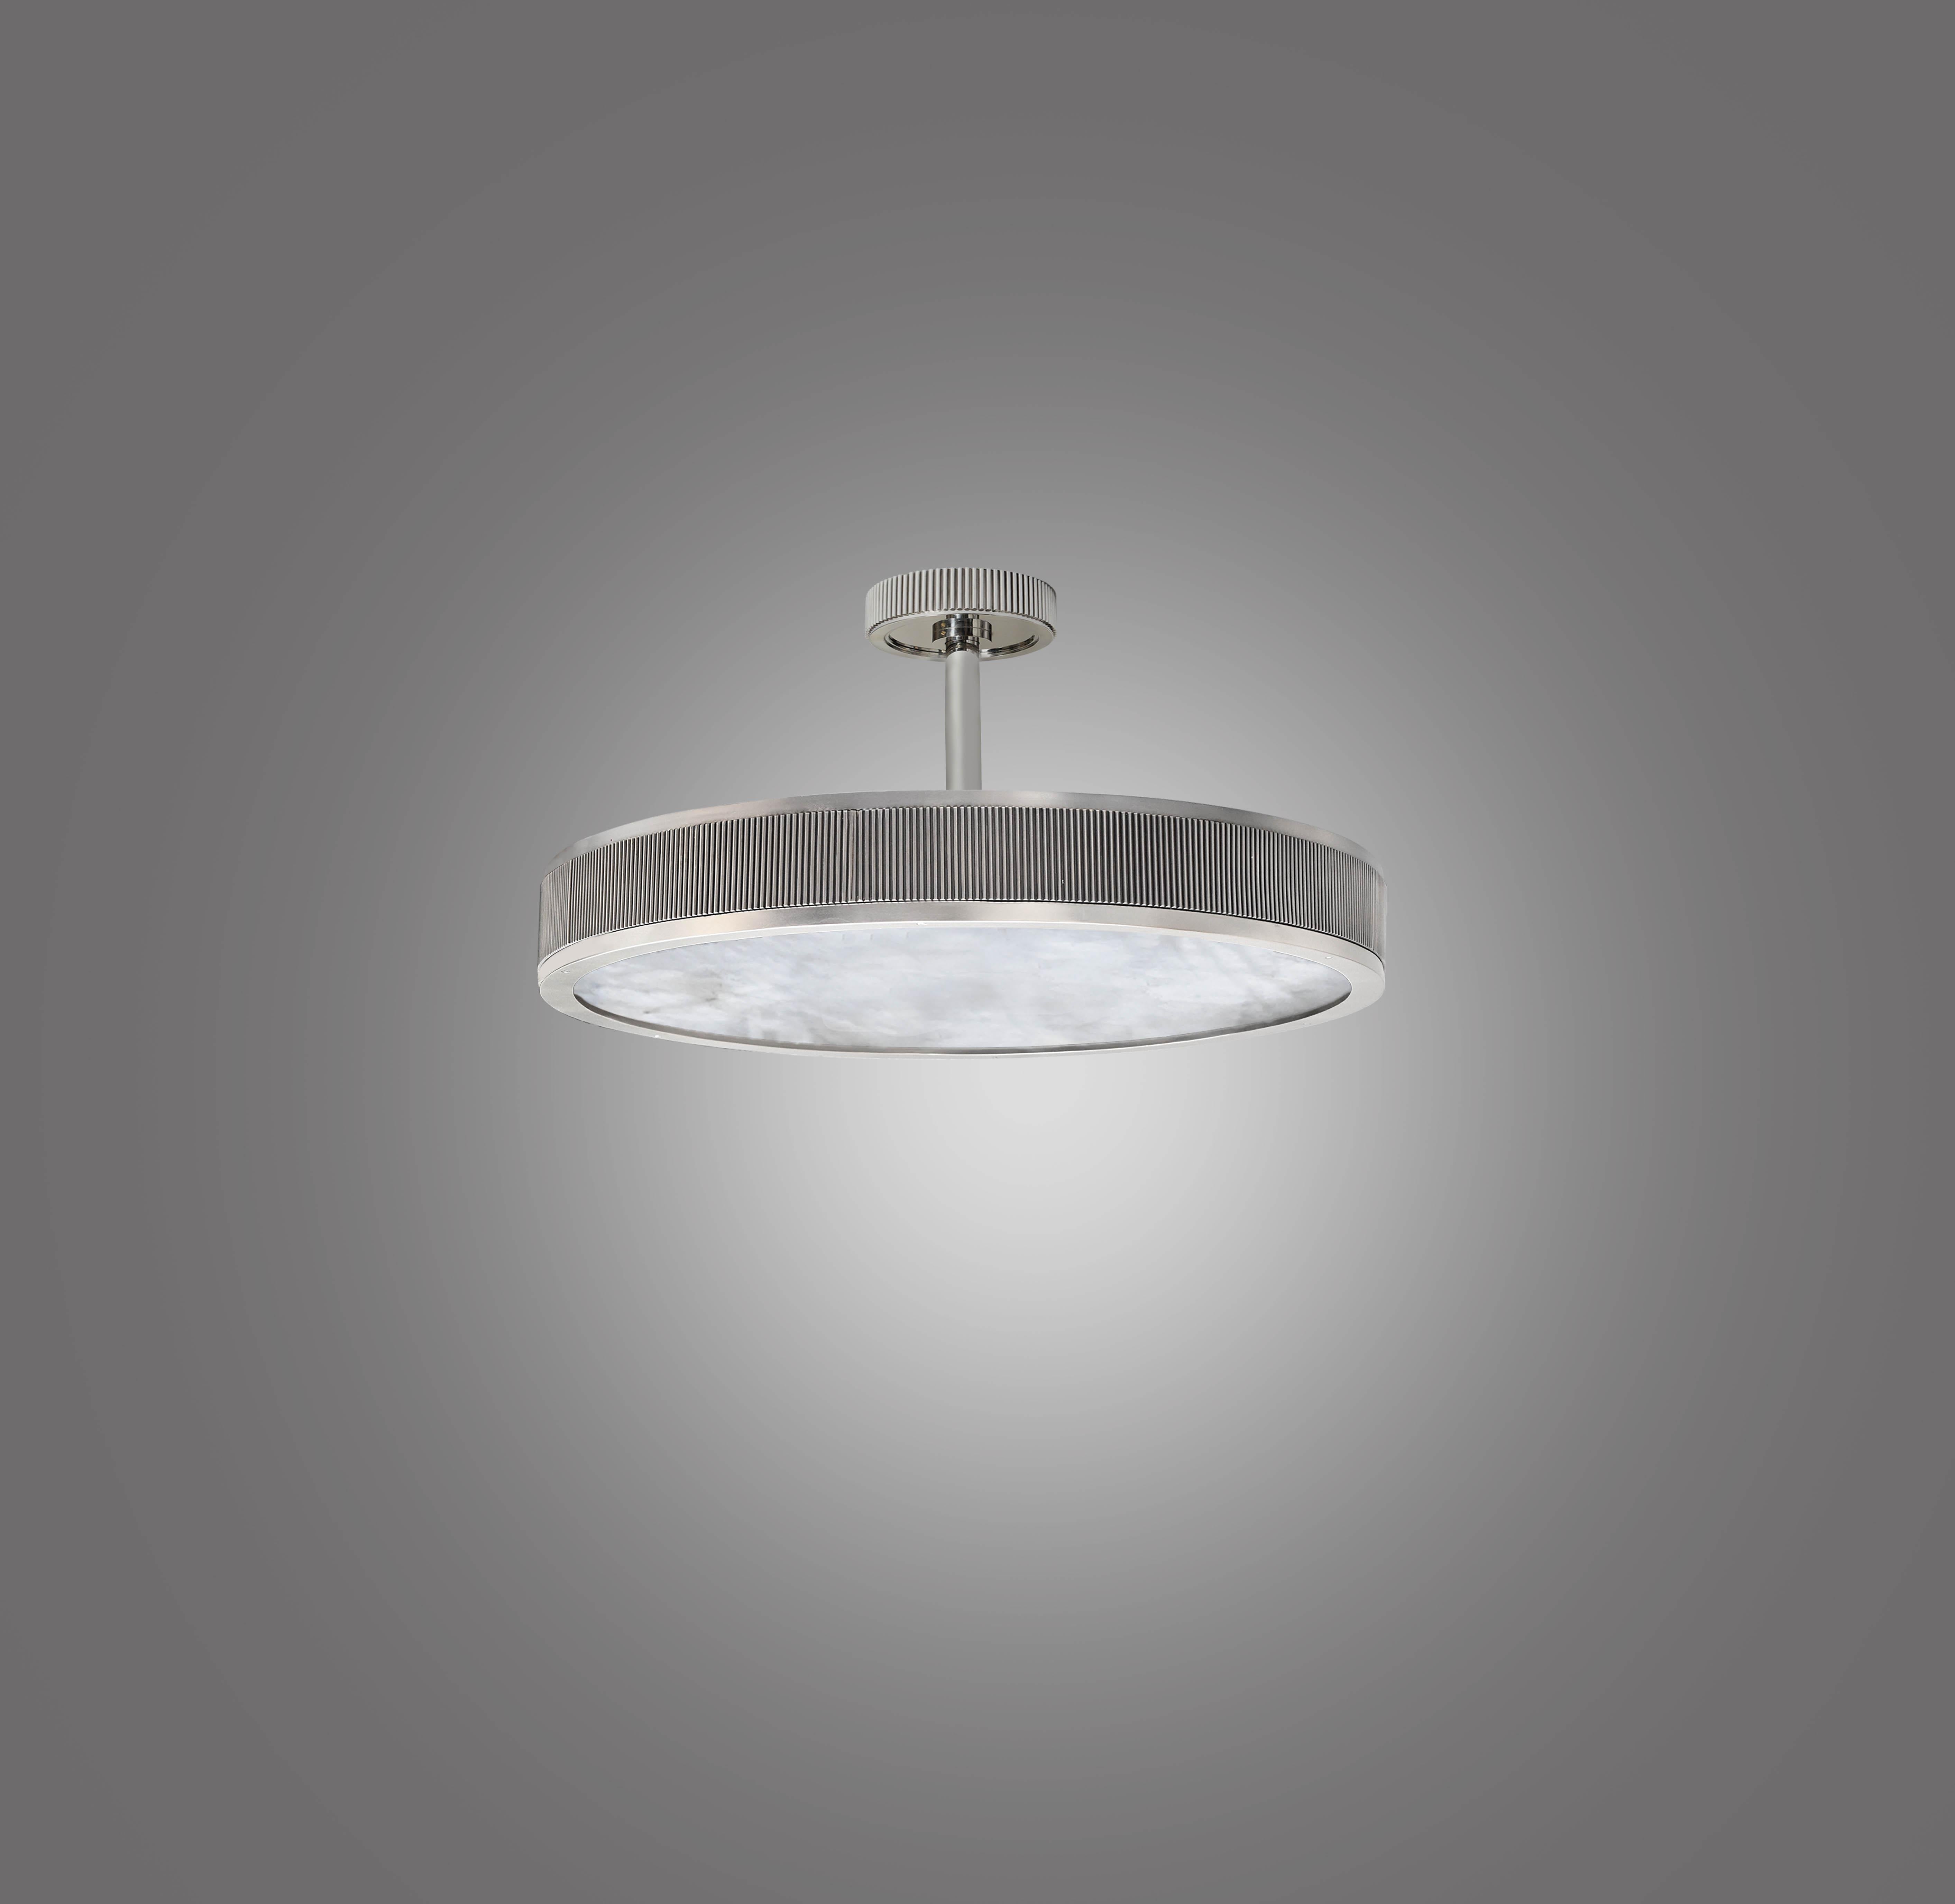 rock crystal semi flush mount with nickel plating frame. Created by Phoenix Gallery, NYC.

Height can be adjustable.